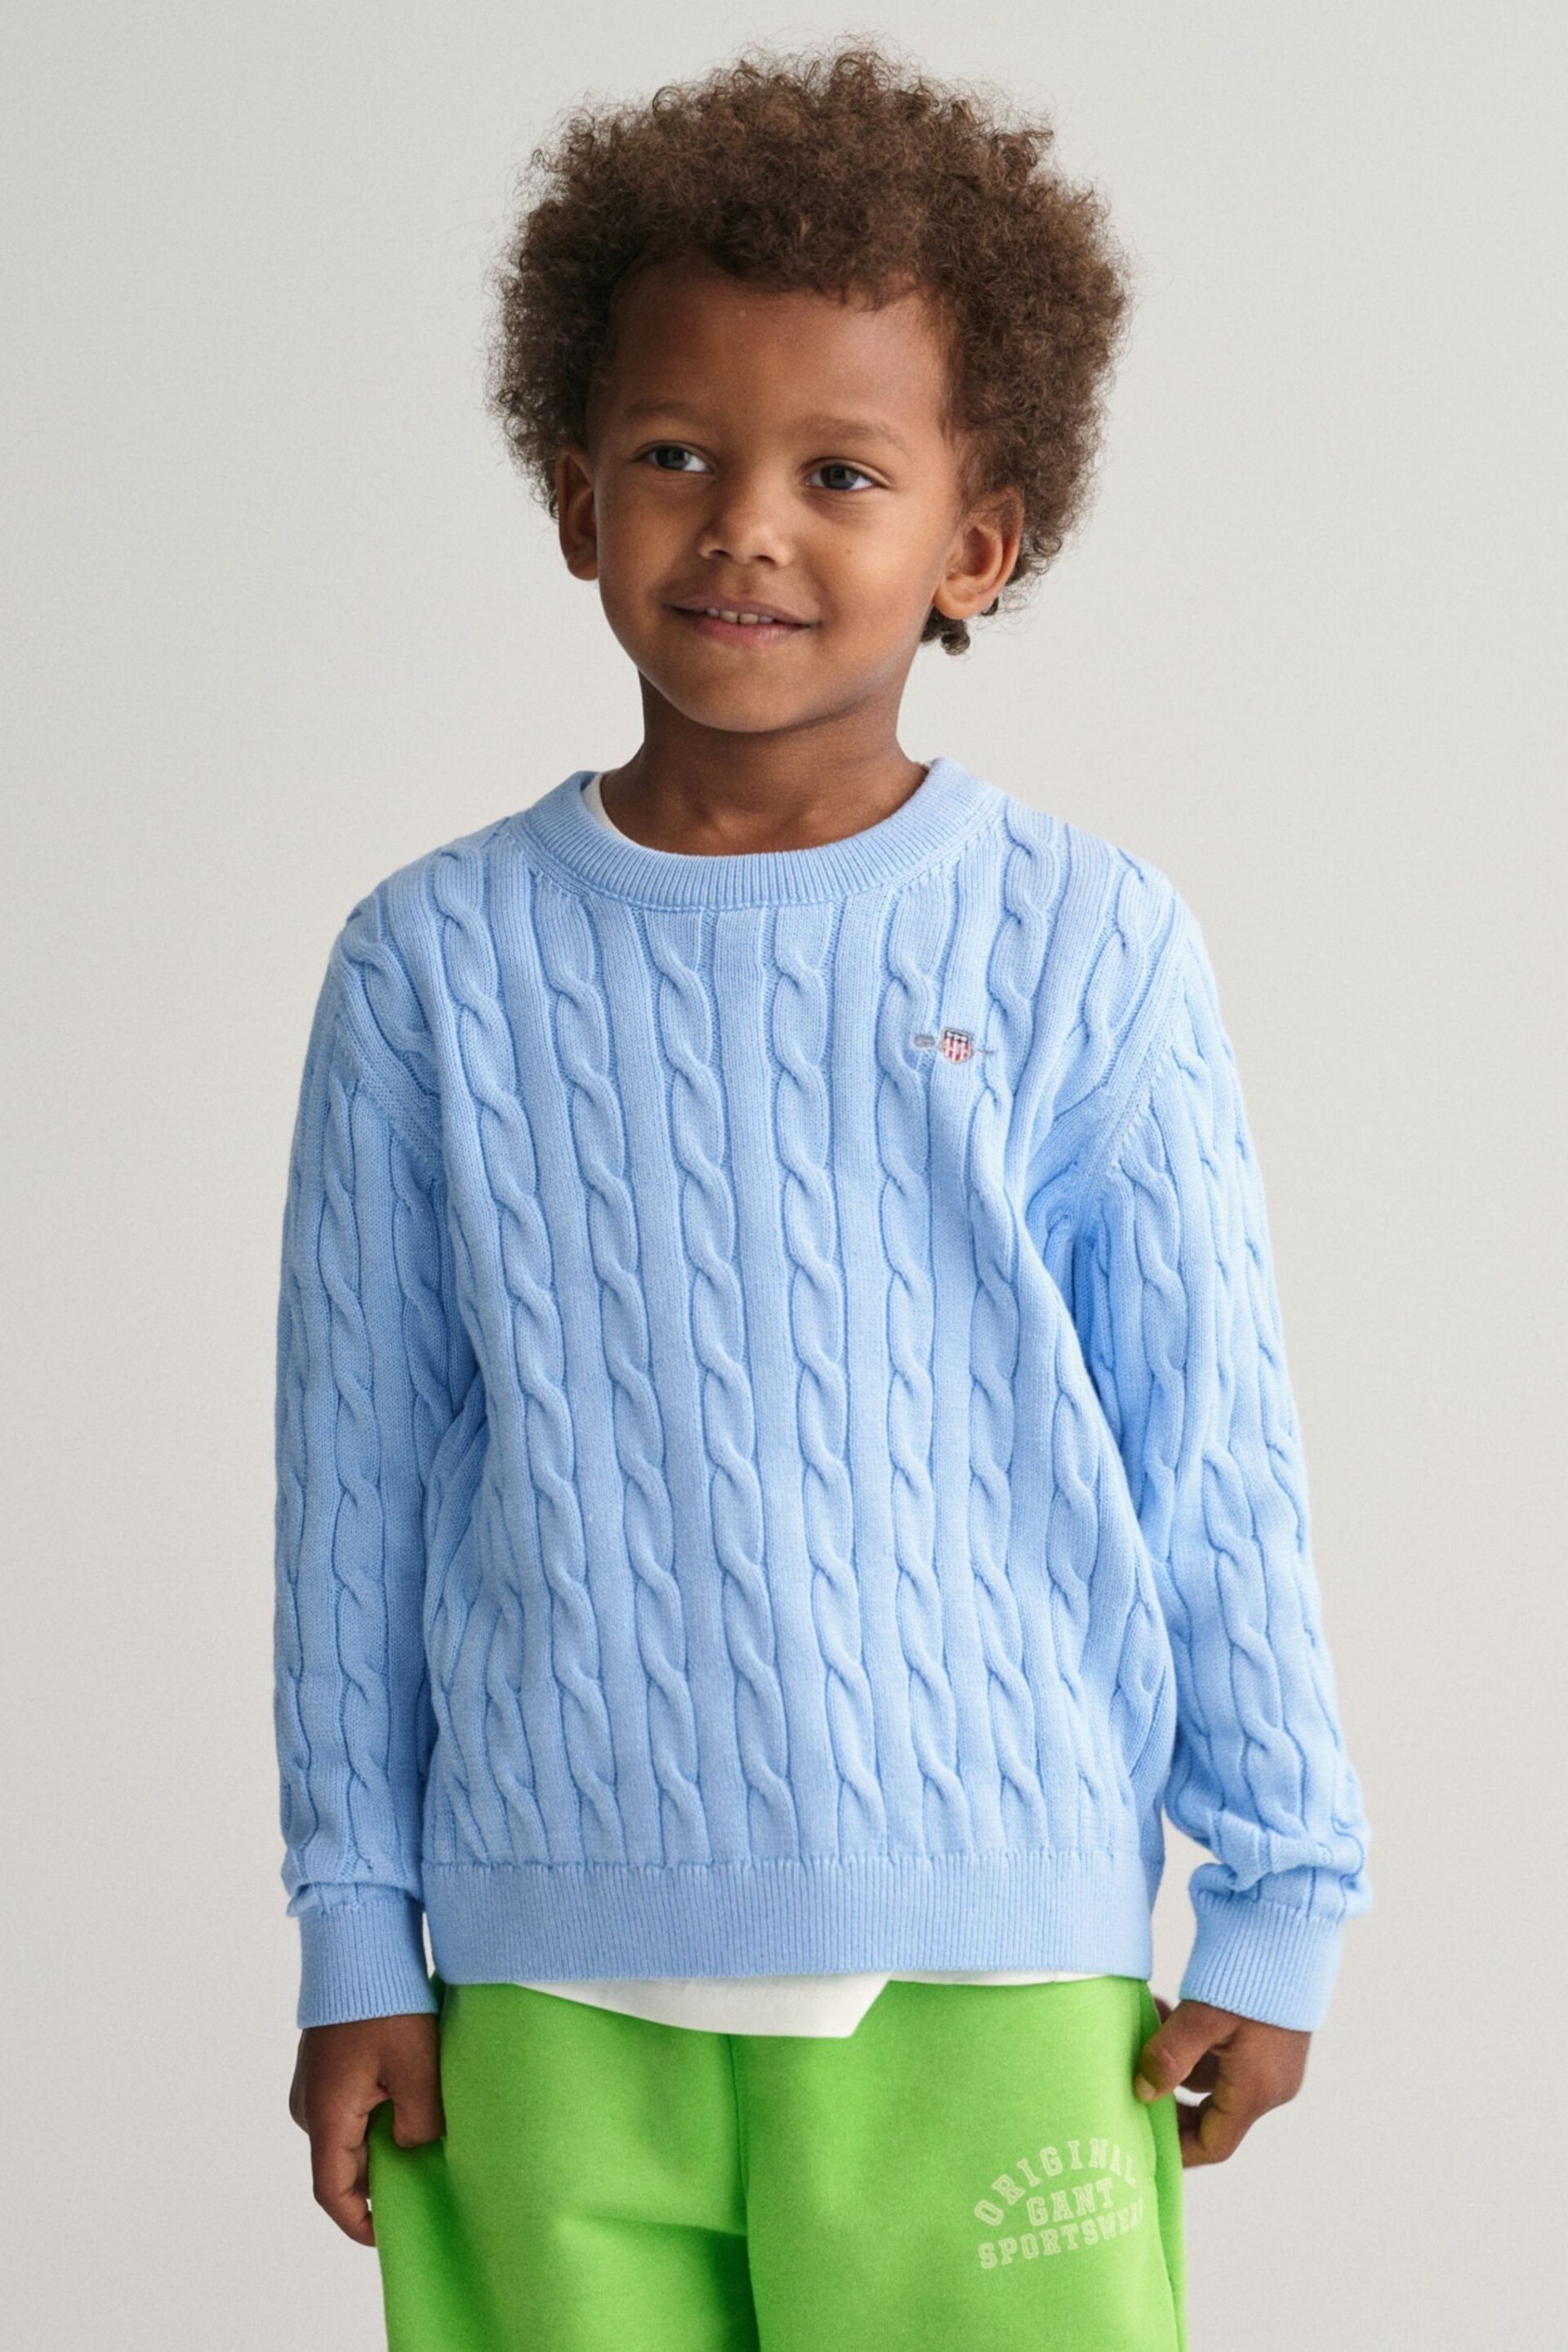 GANT Kids Shield Cotton Cable Knit Crew Neck Sweater - Image 1 of 6